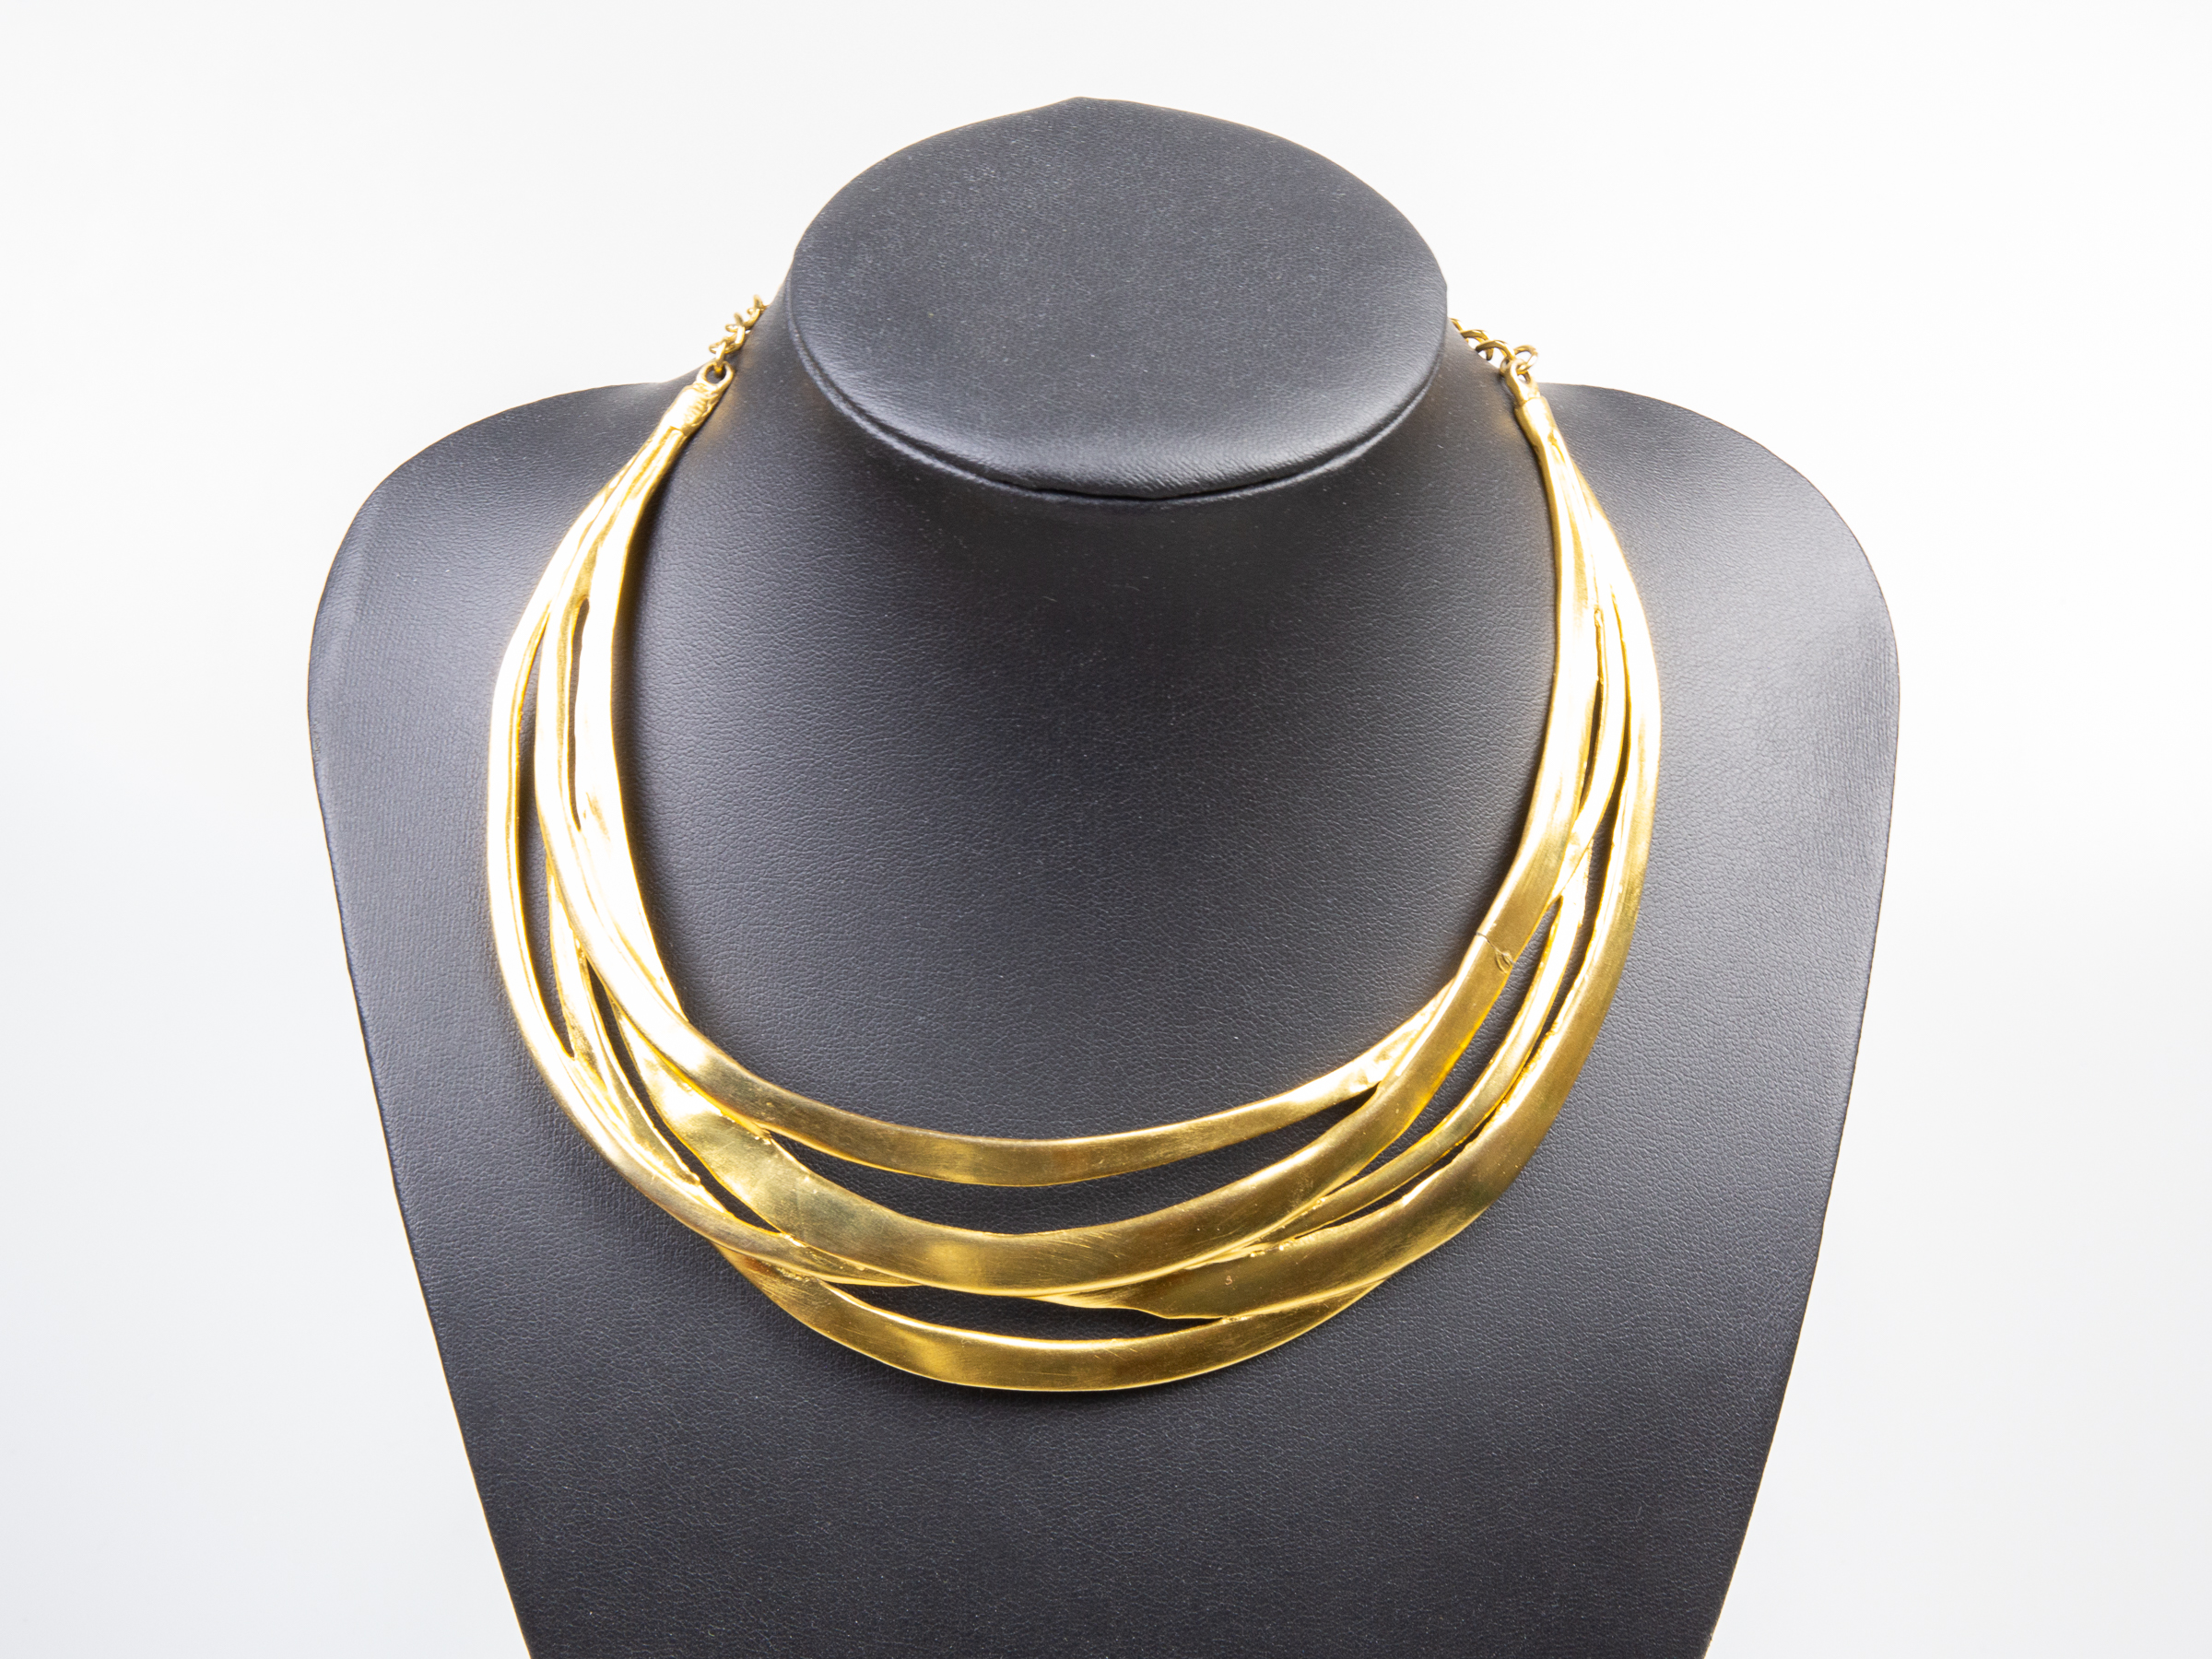 Vintage Kenneth Jay Lane collar necklace. Stunning gilt cut out collar necklace from the Safari range. Signed Kenneth Lane to the back. Slightly adjustable to maximum of 340mm Main photo of necklace displayed on a dark display stand